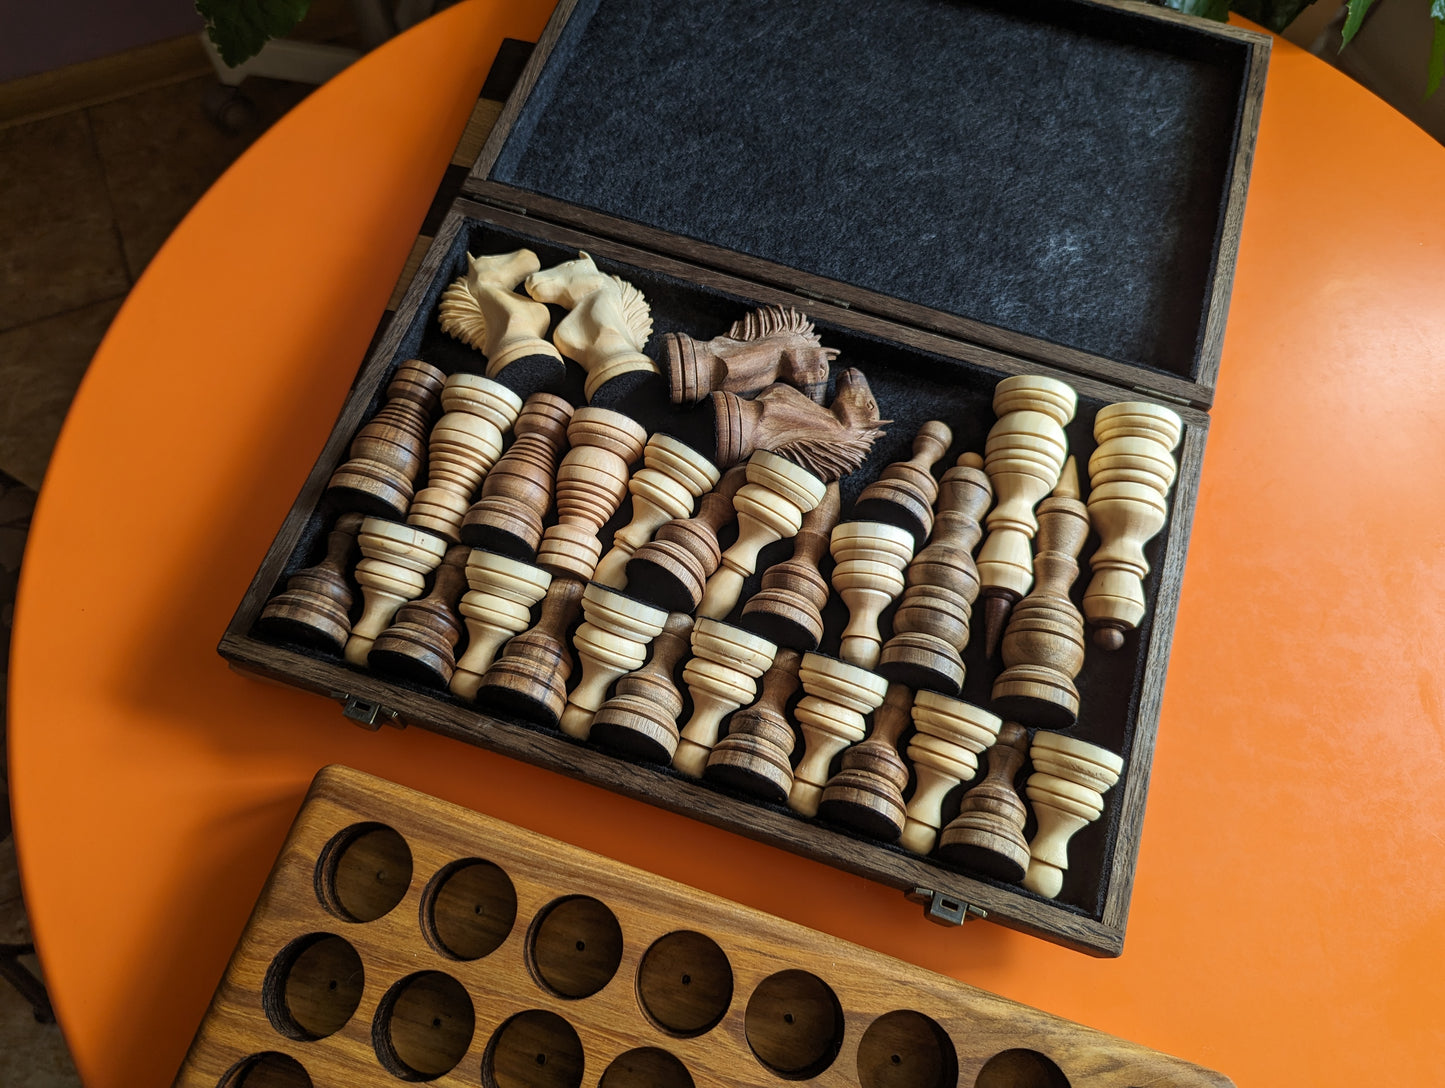 Handcrafted wooden carved chess pieces. White maple and walnut wood.